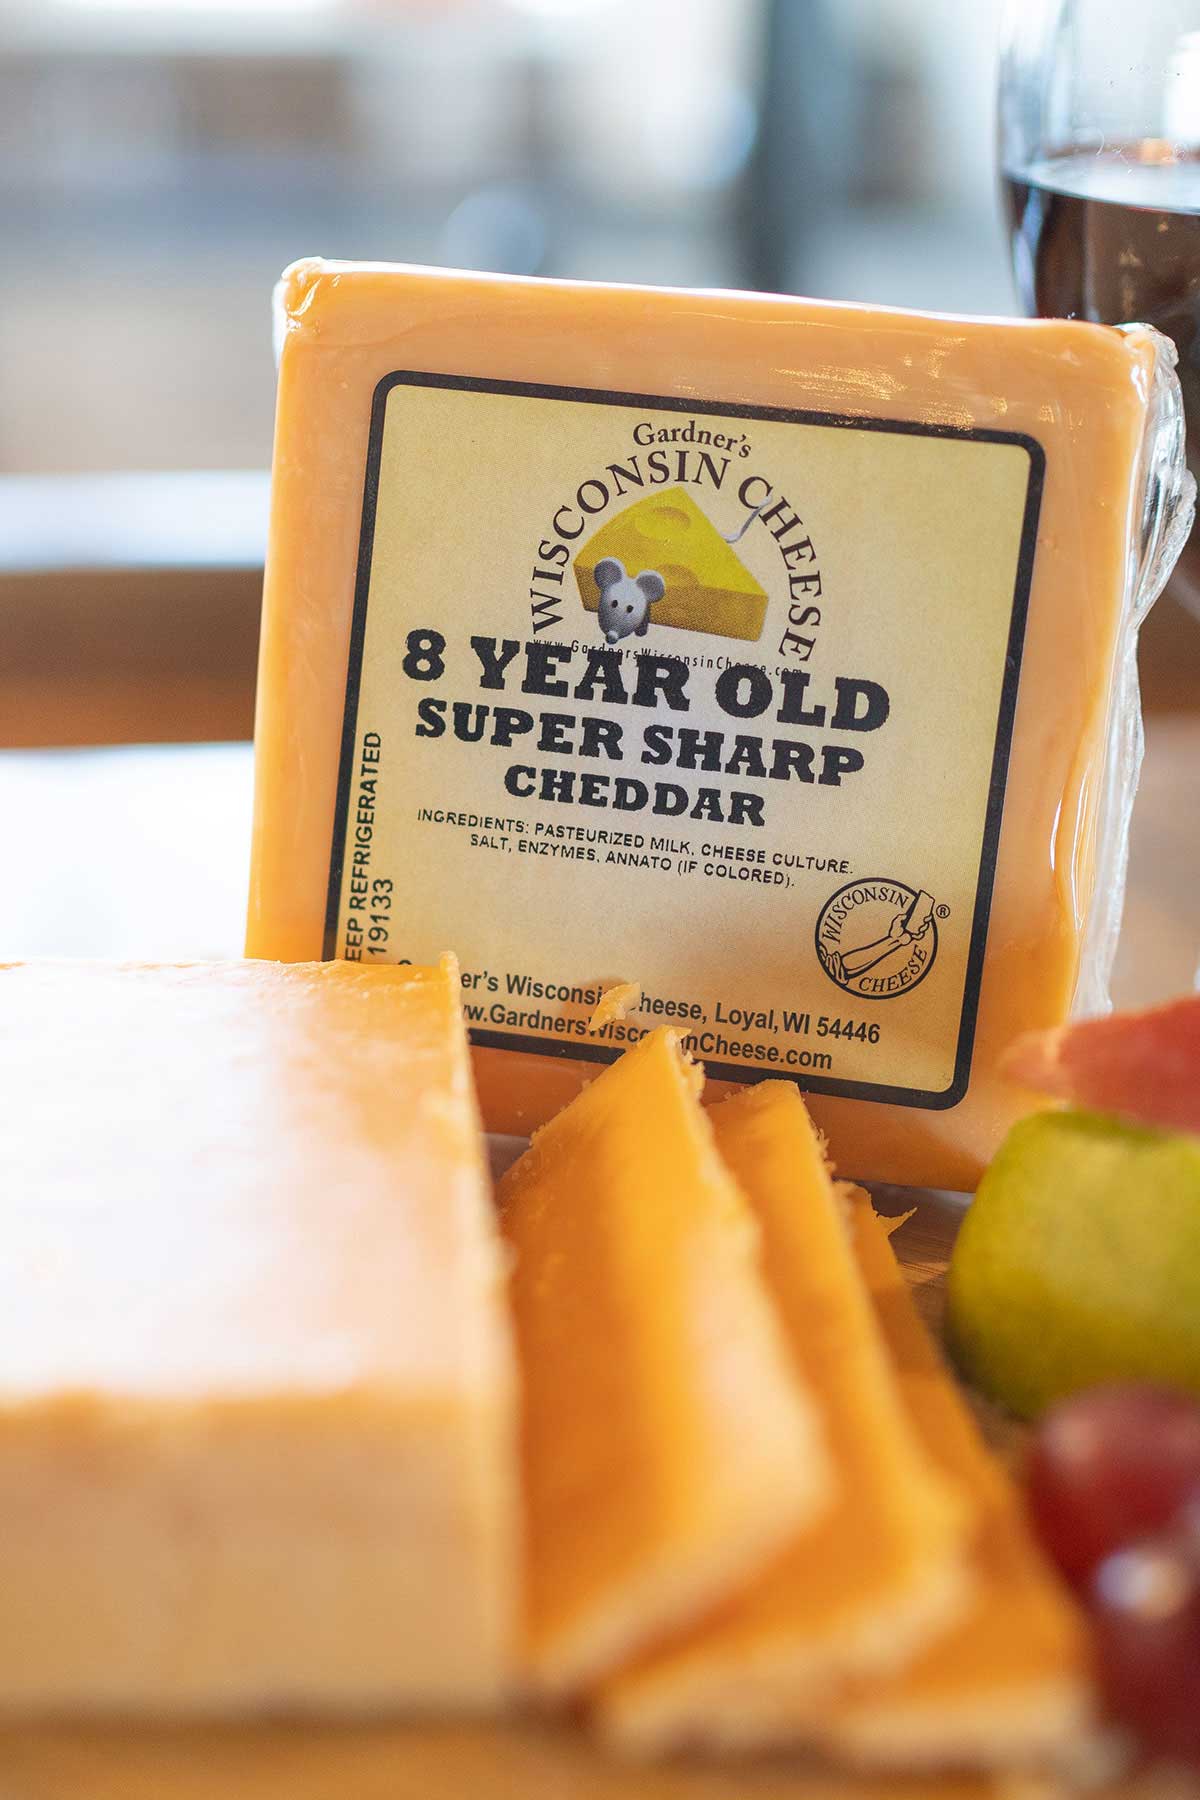 8-Year-Old Super-Sharp Cheddar - Gardners Wisconsin Cheese and Sausage